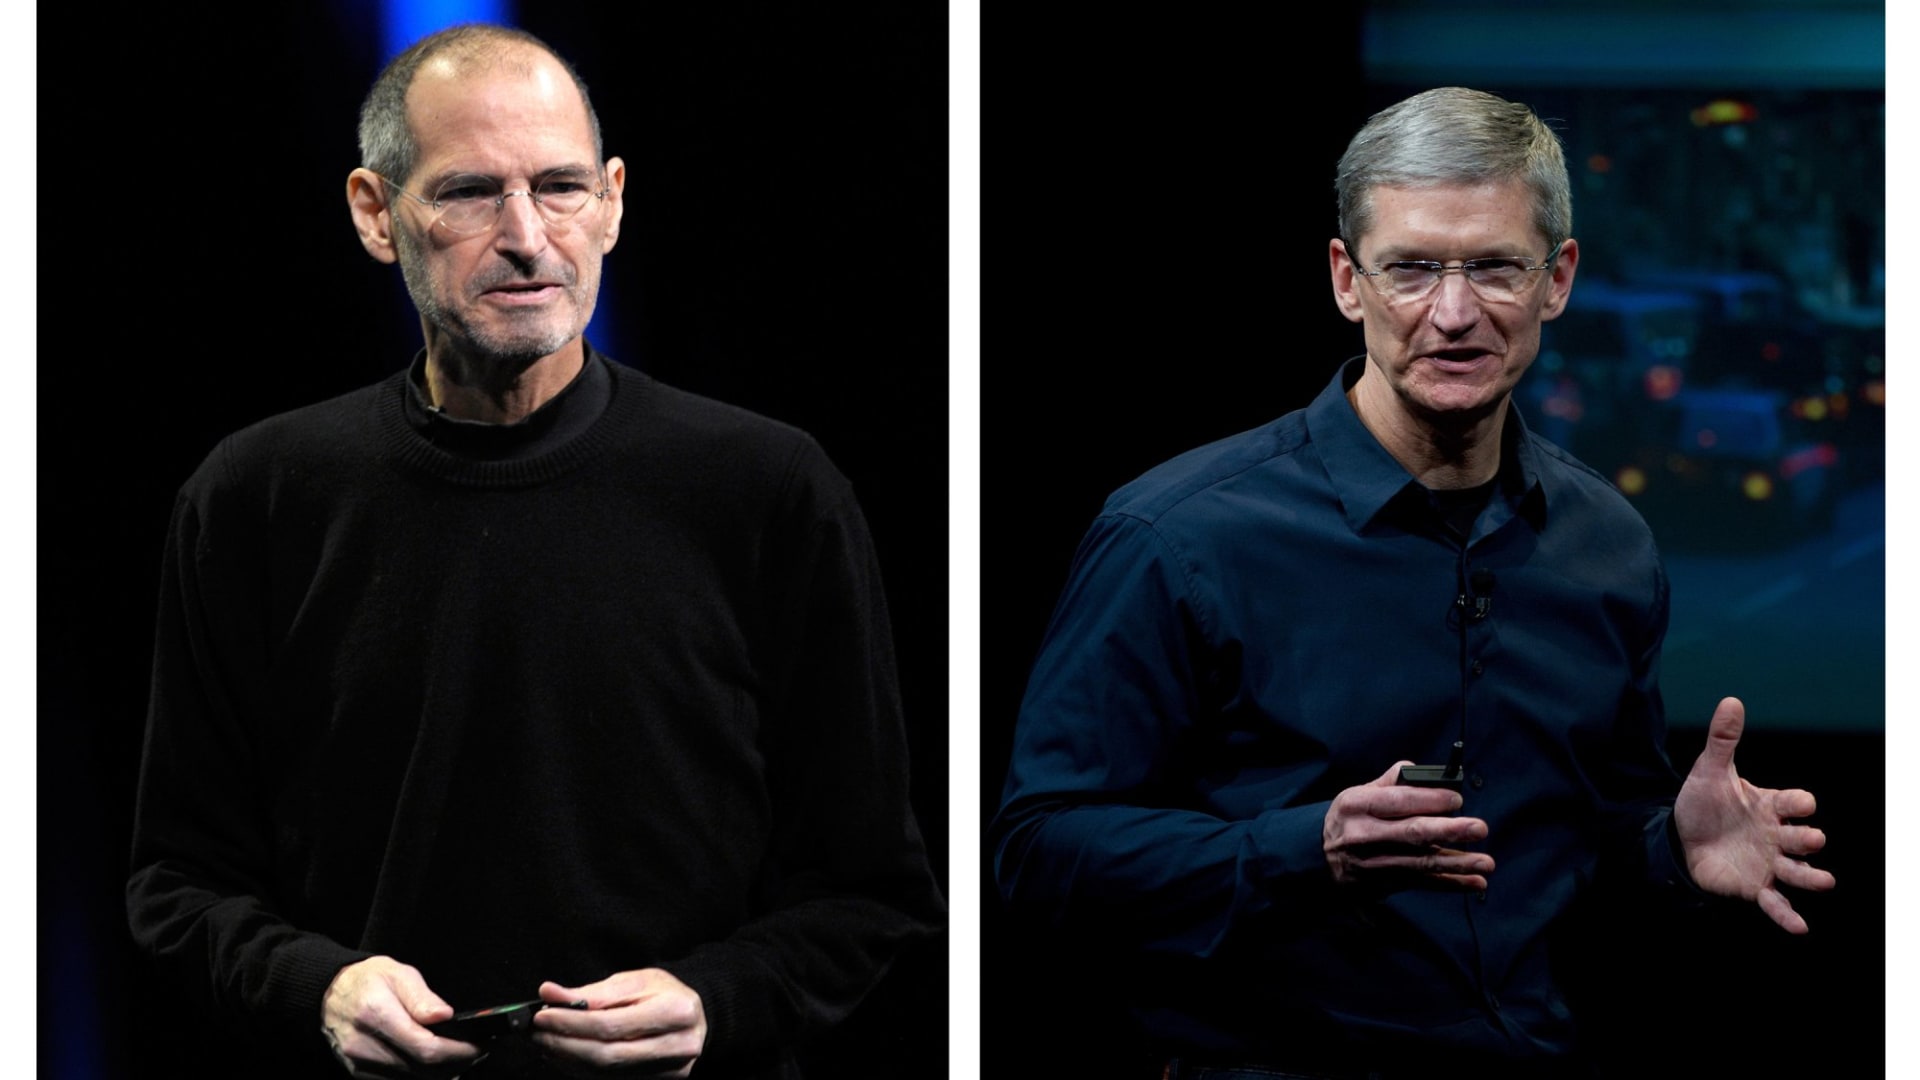 Steve Jobs and Tim Cook.